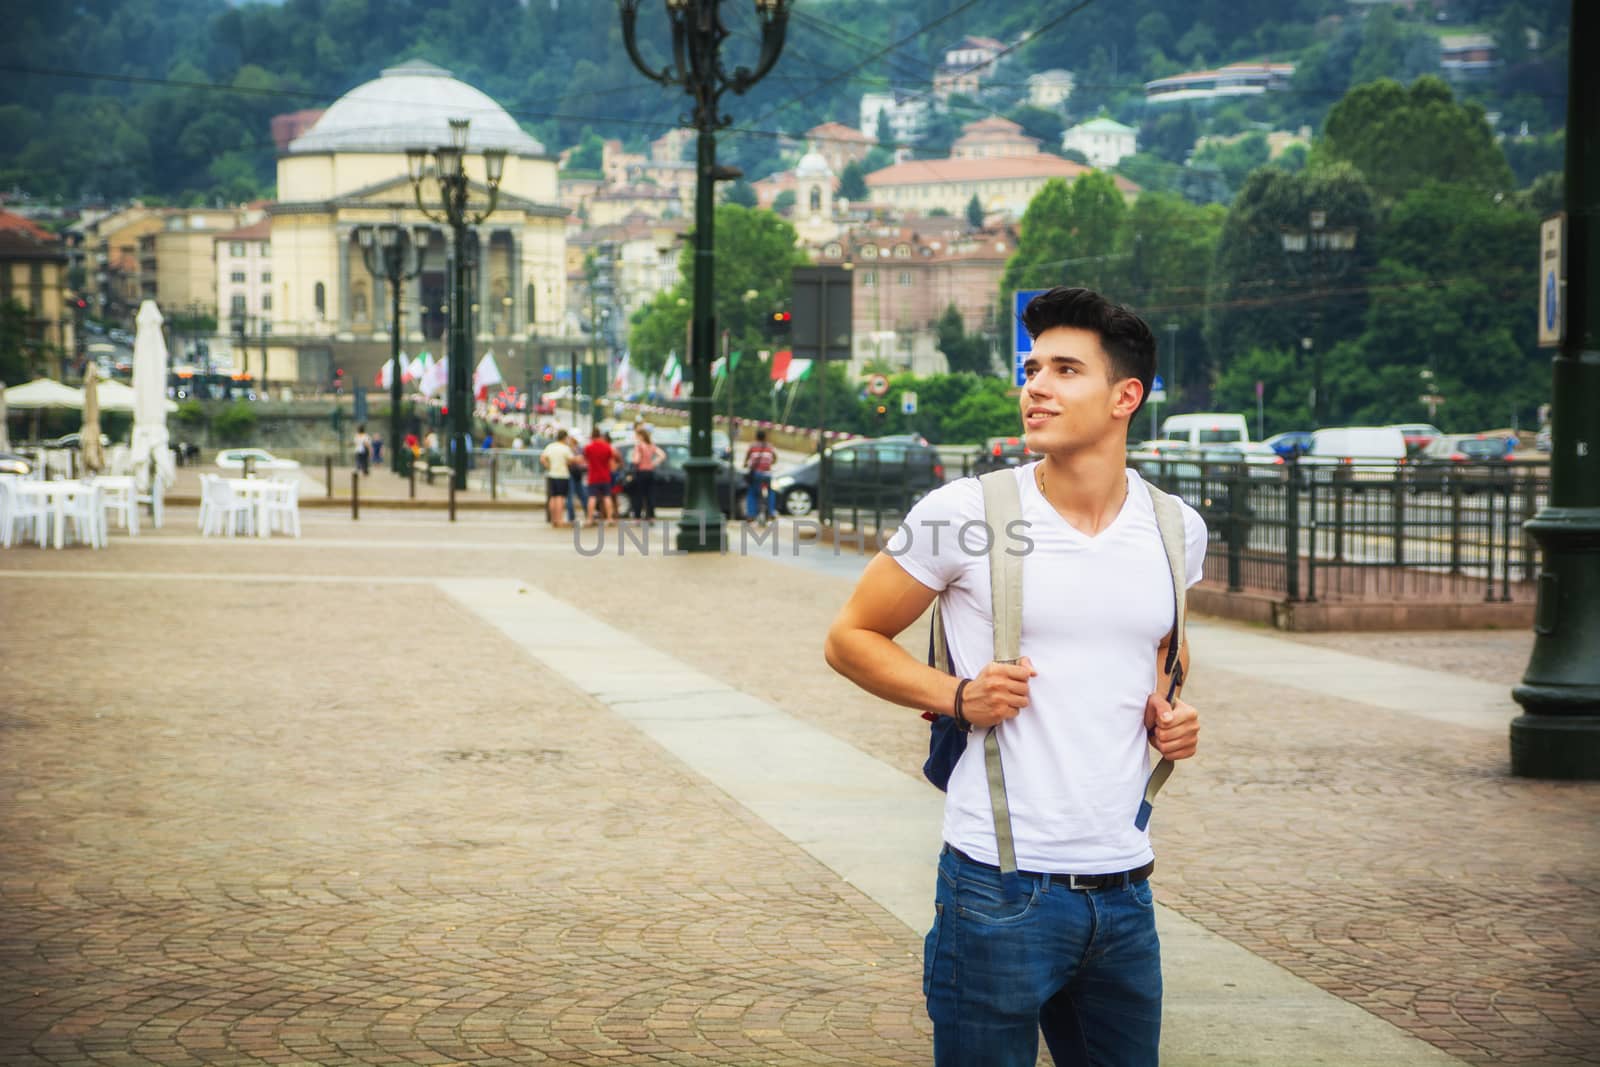 Handsome young man walking in European city square, Piazza Vittorio Veneto in Turin, Italy